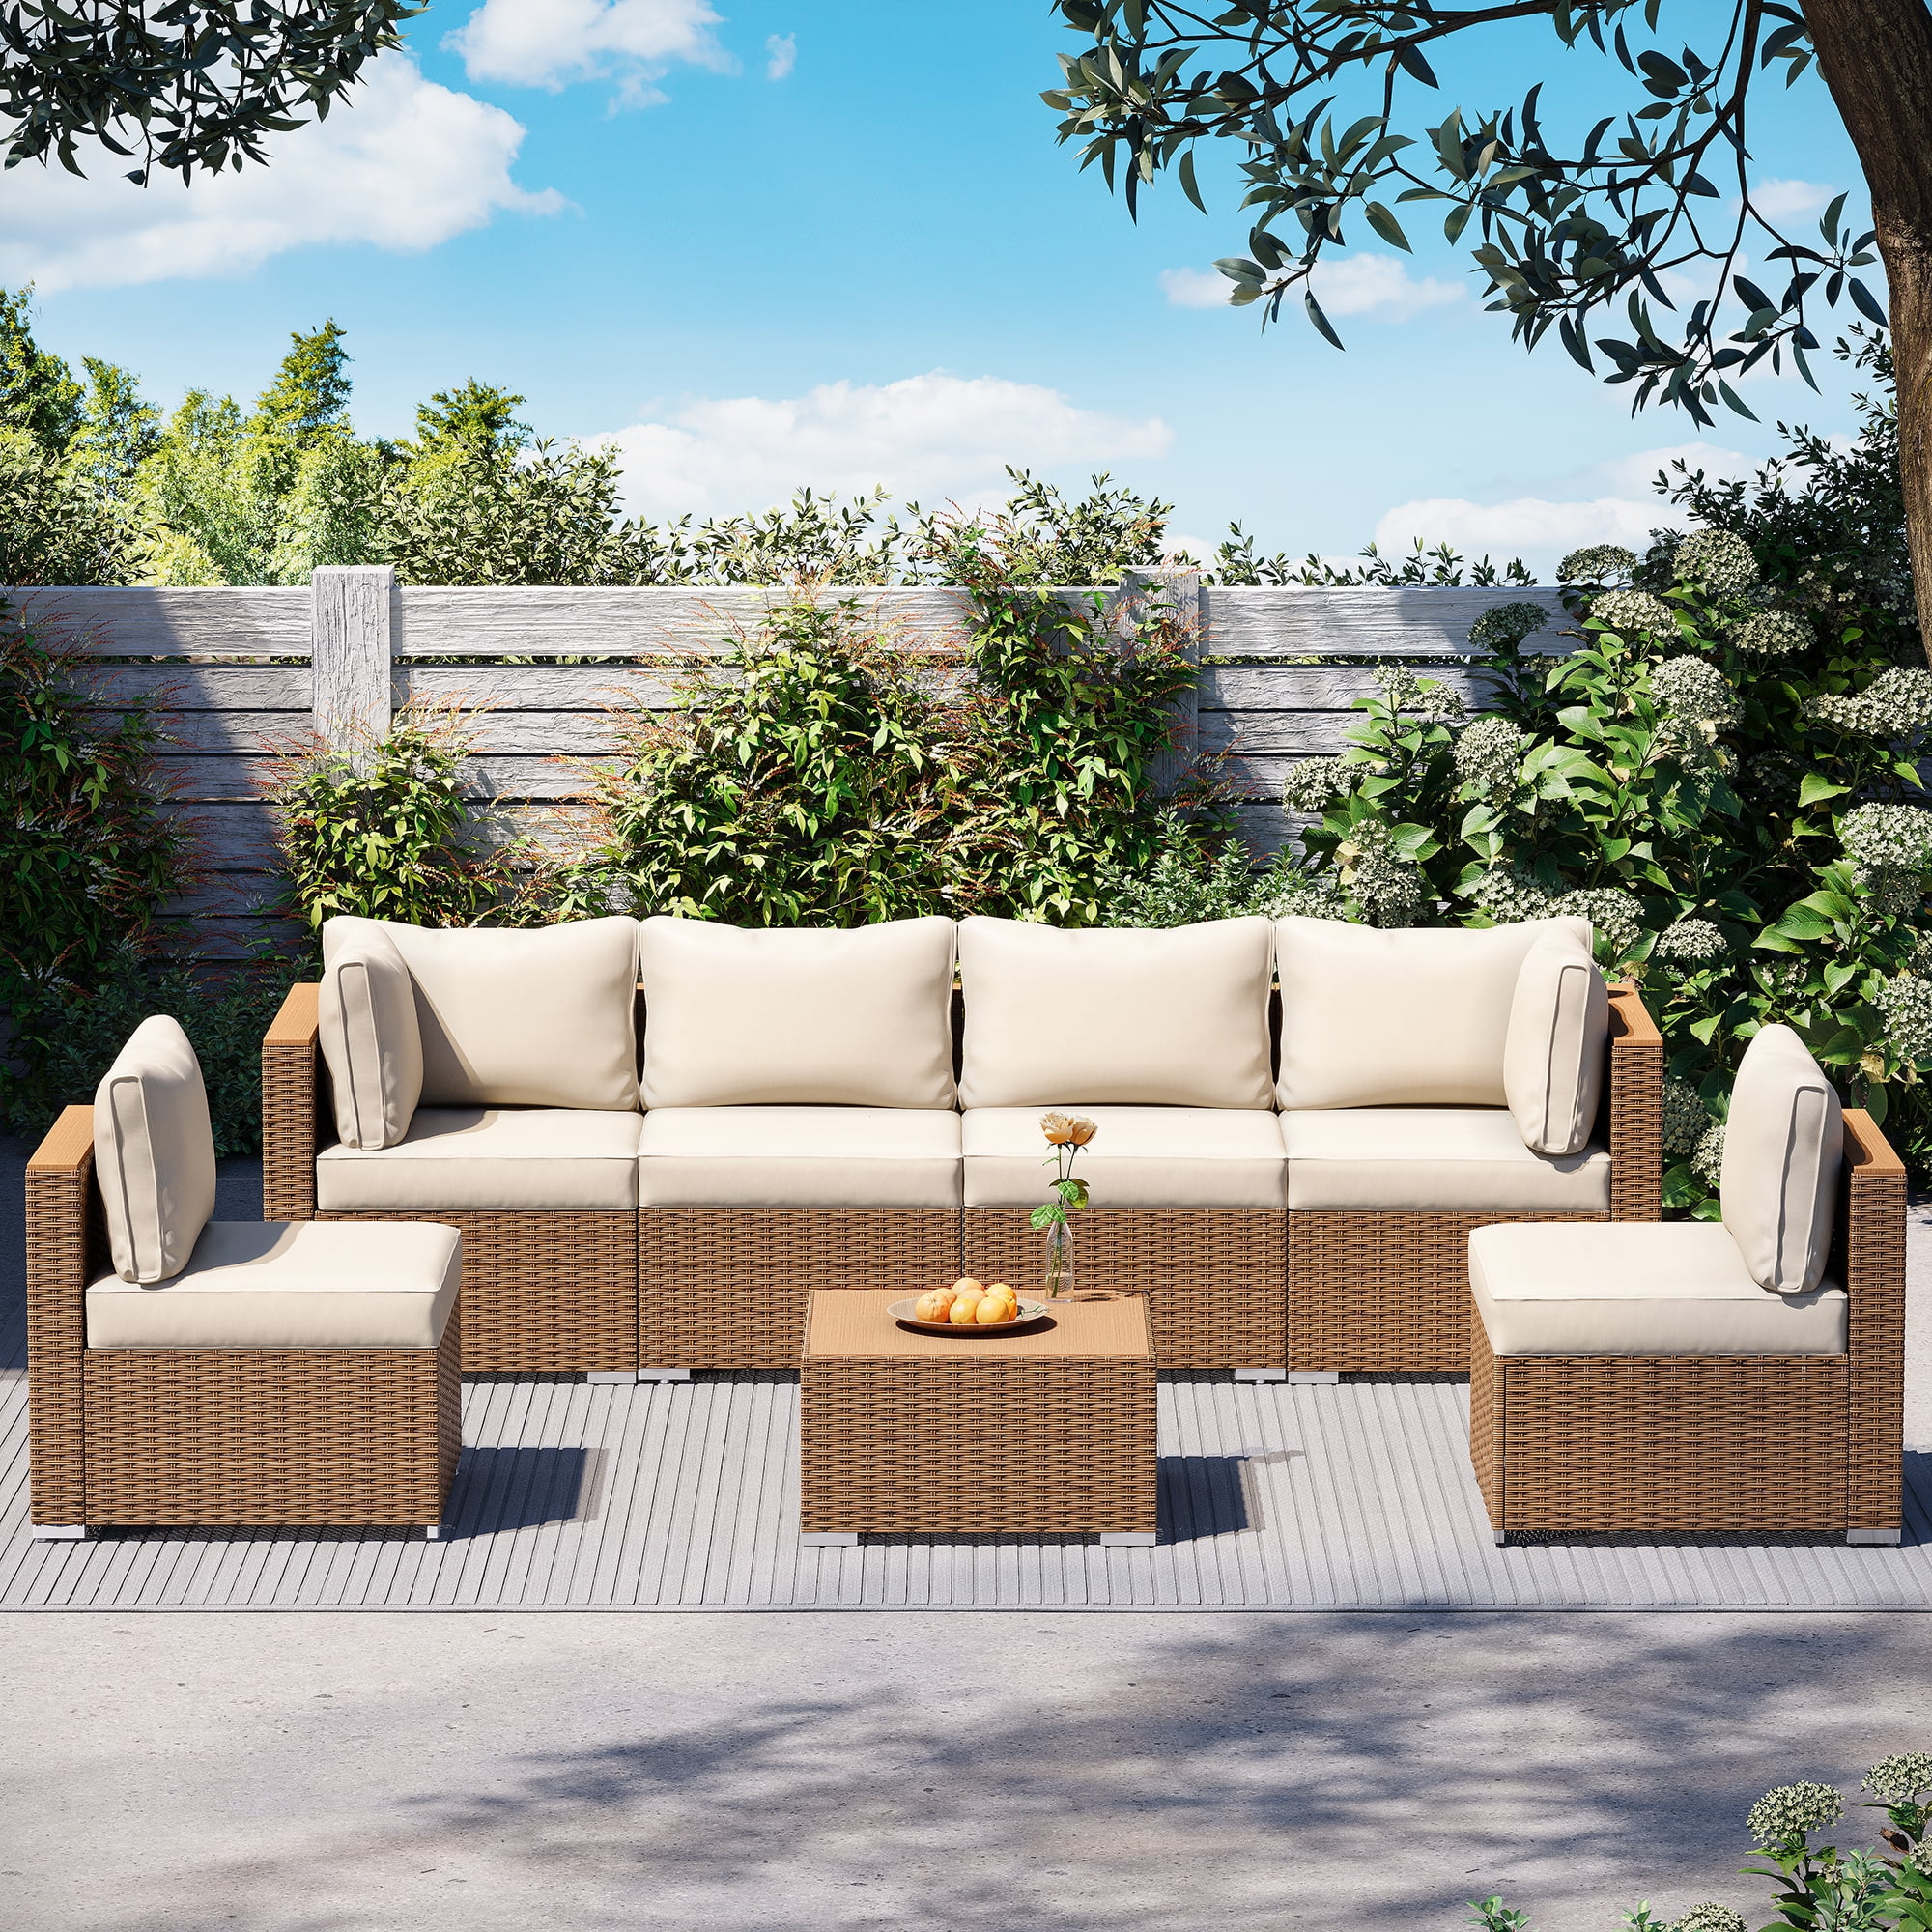 LAUSAINT HOME 7 Pieces Patio Conversation Set, Outdoor Sectionals with 6 Chairs and 1 Coffee Table, Beige Cushions